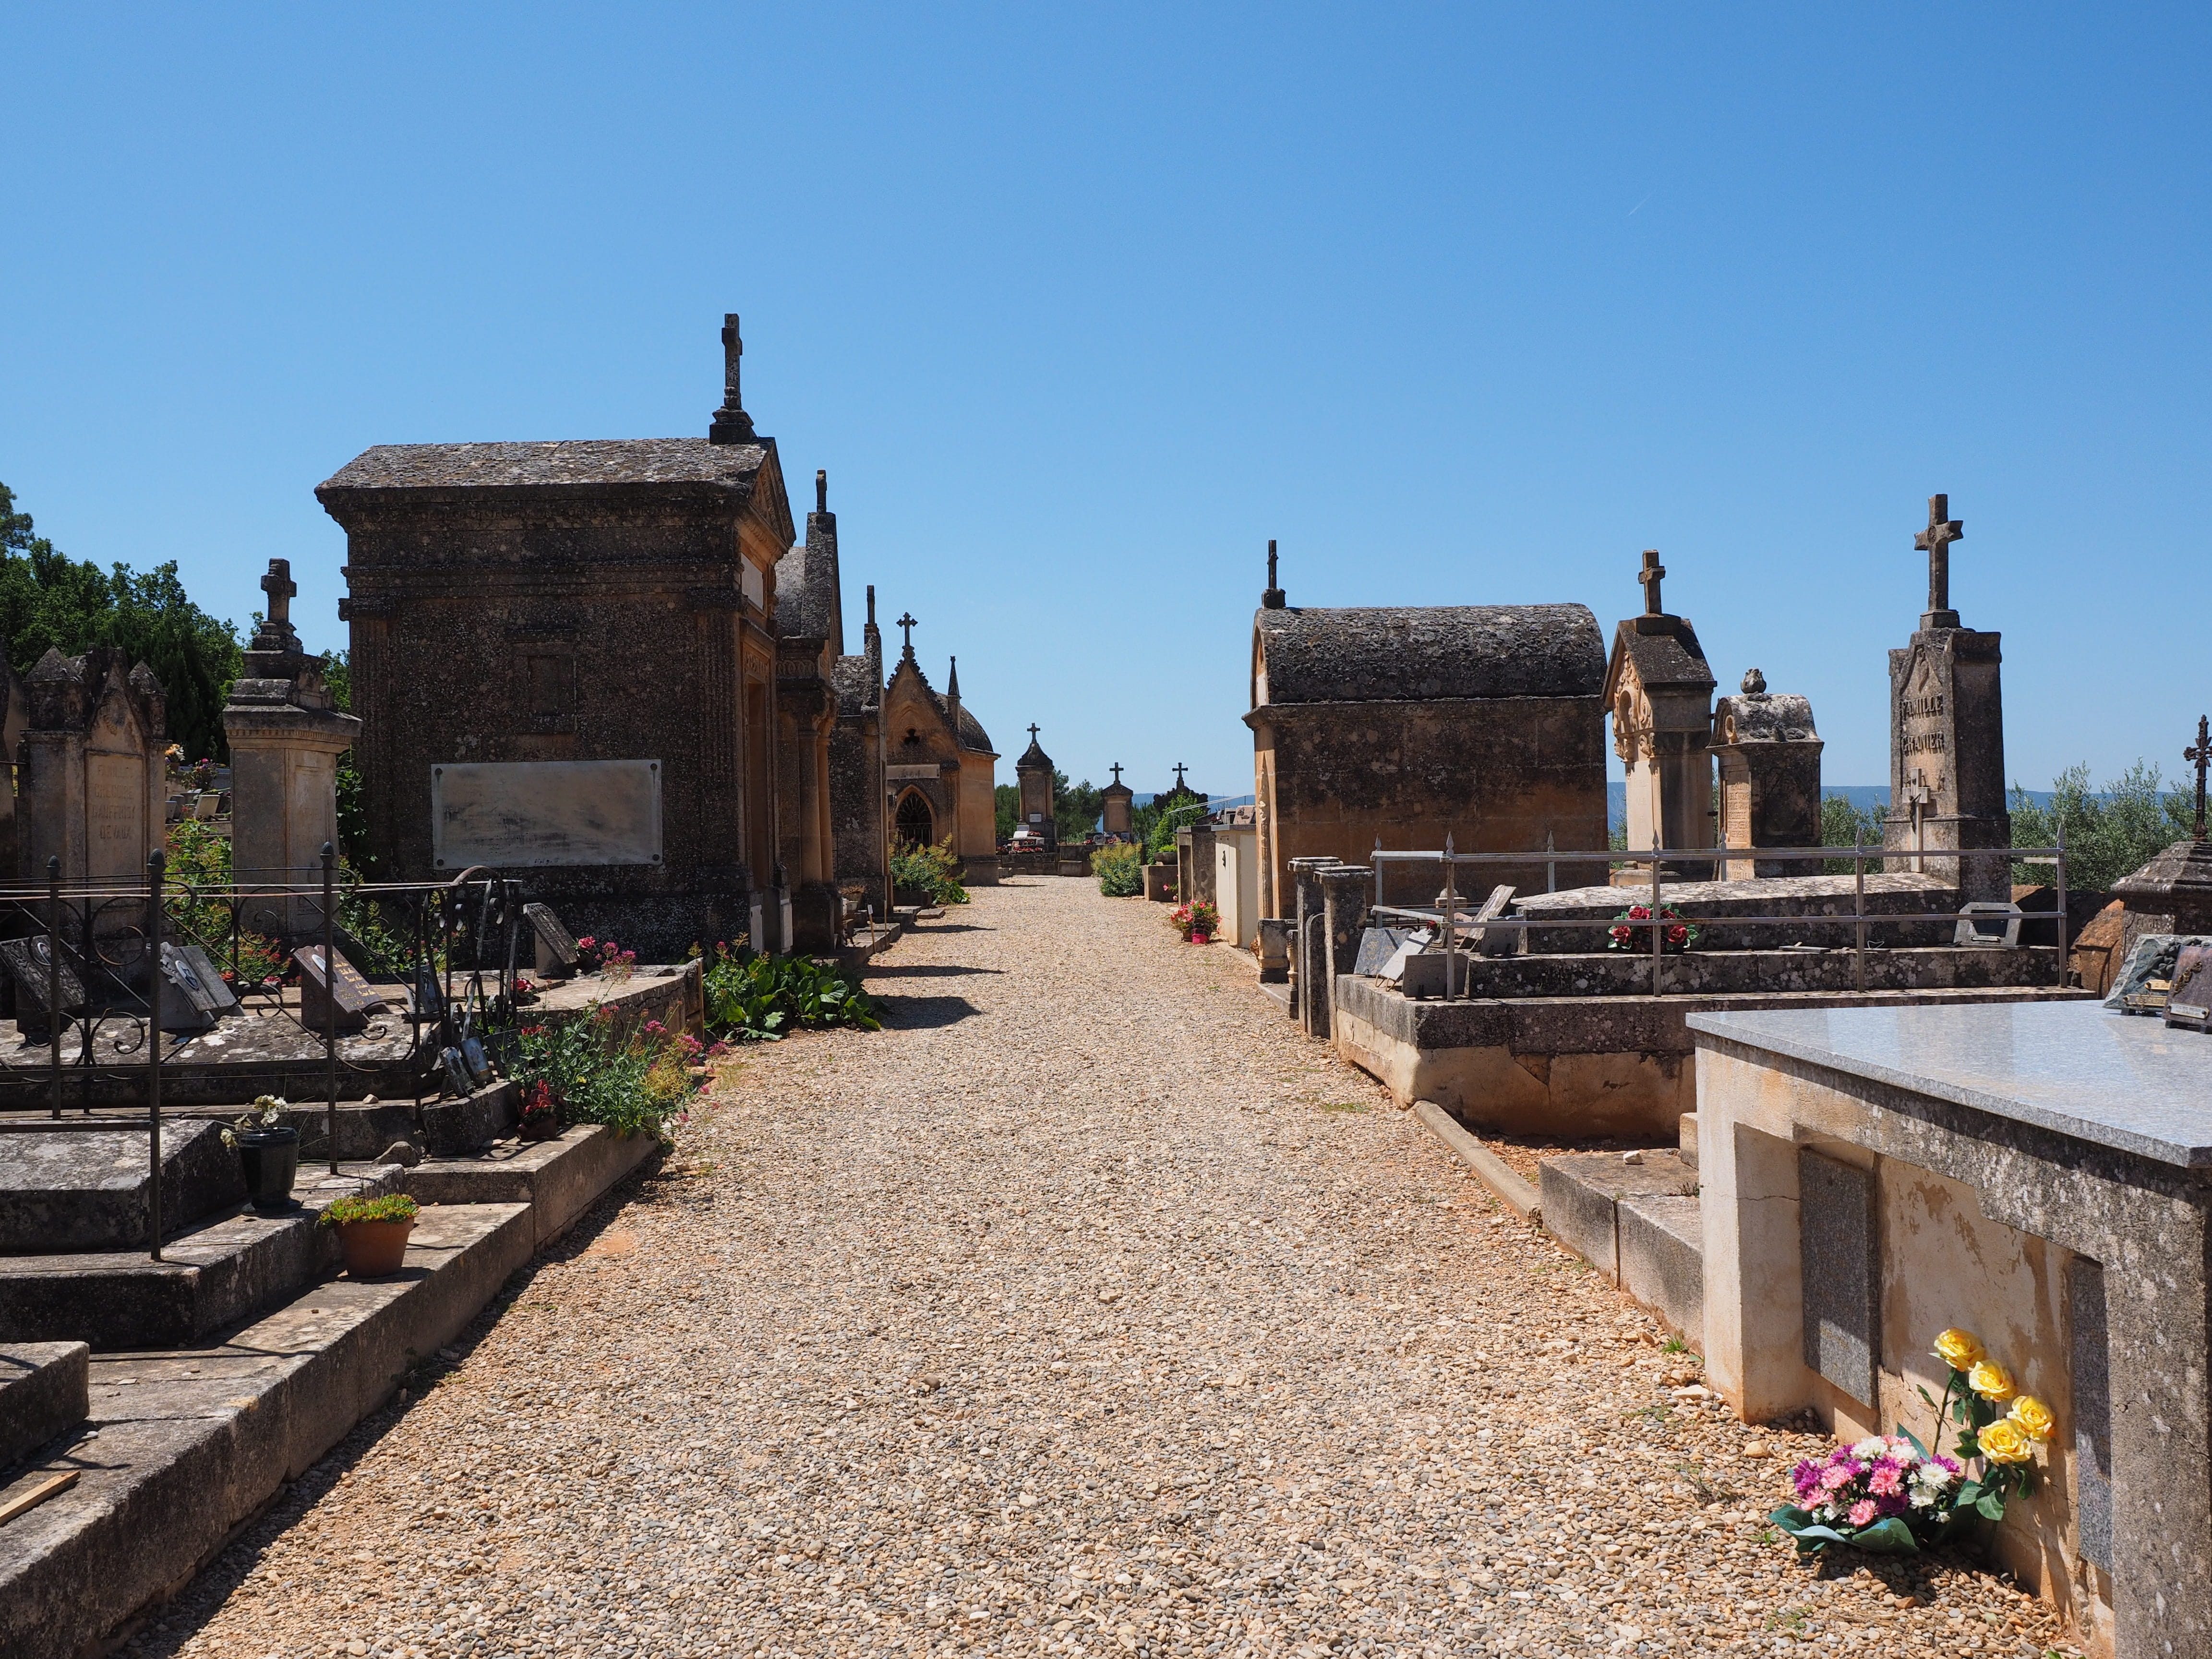 Cemetery, Graves, Gravestone, old cemetery, roussillon, tomb